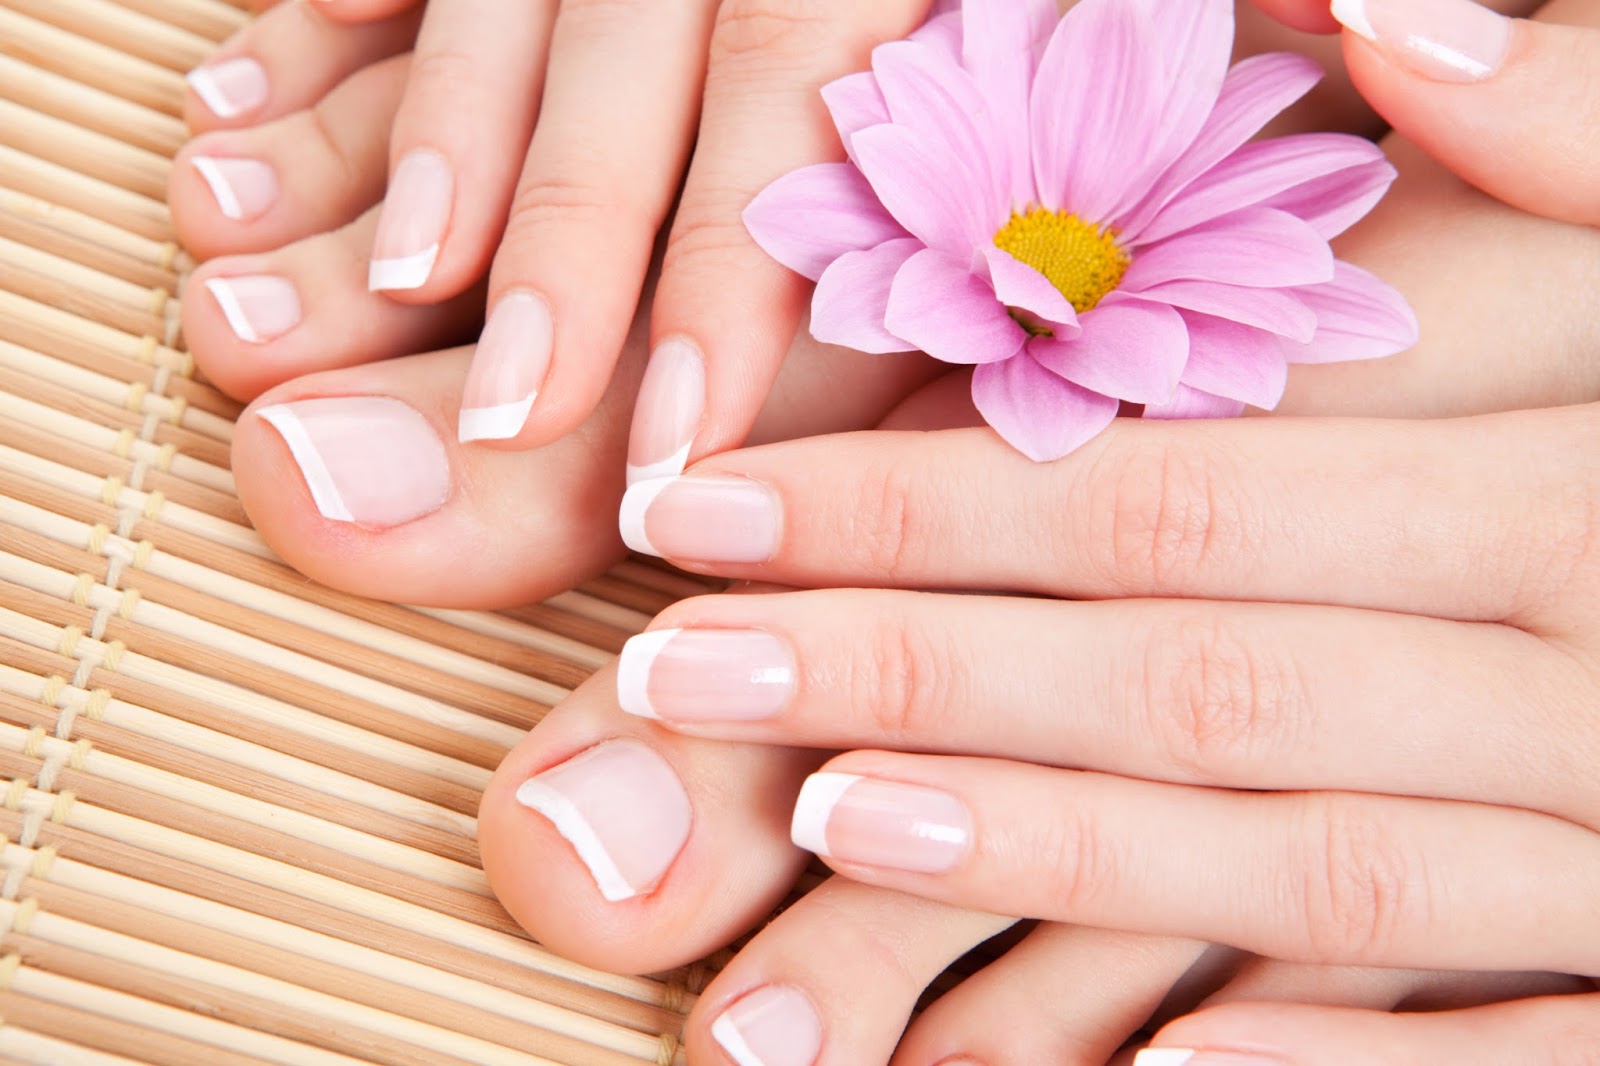 7. Nail Care Products for Stronger Nails - wide 1